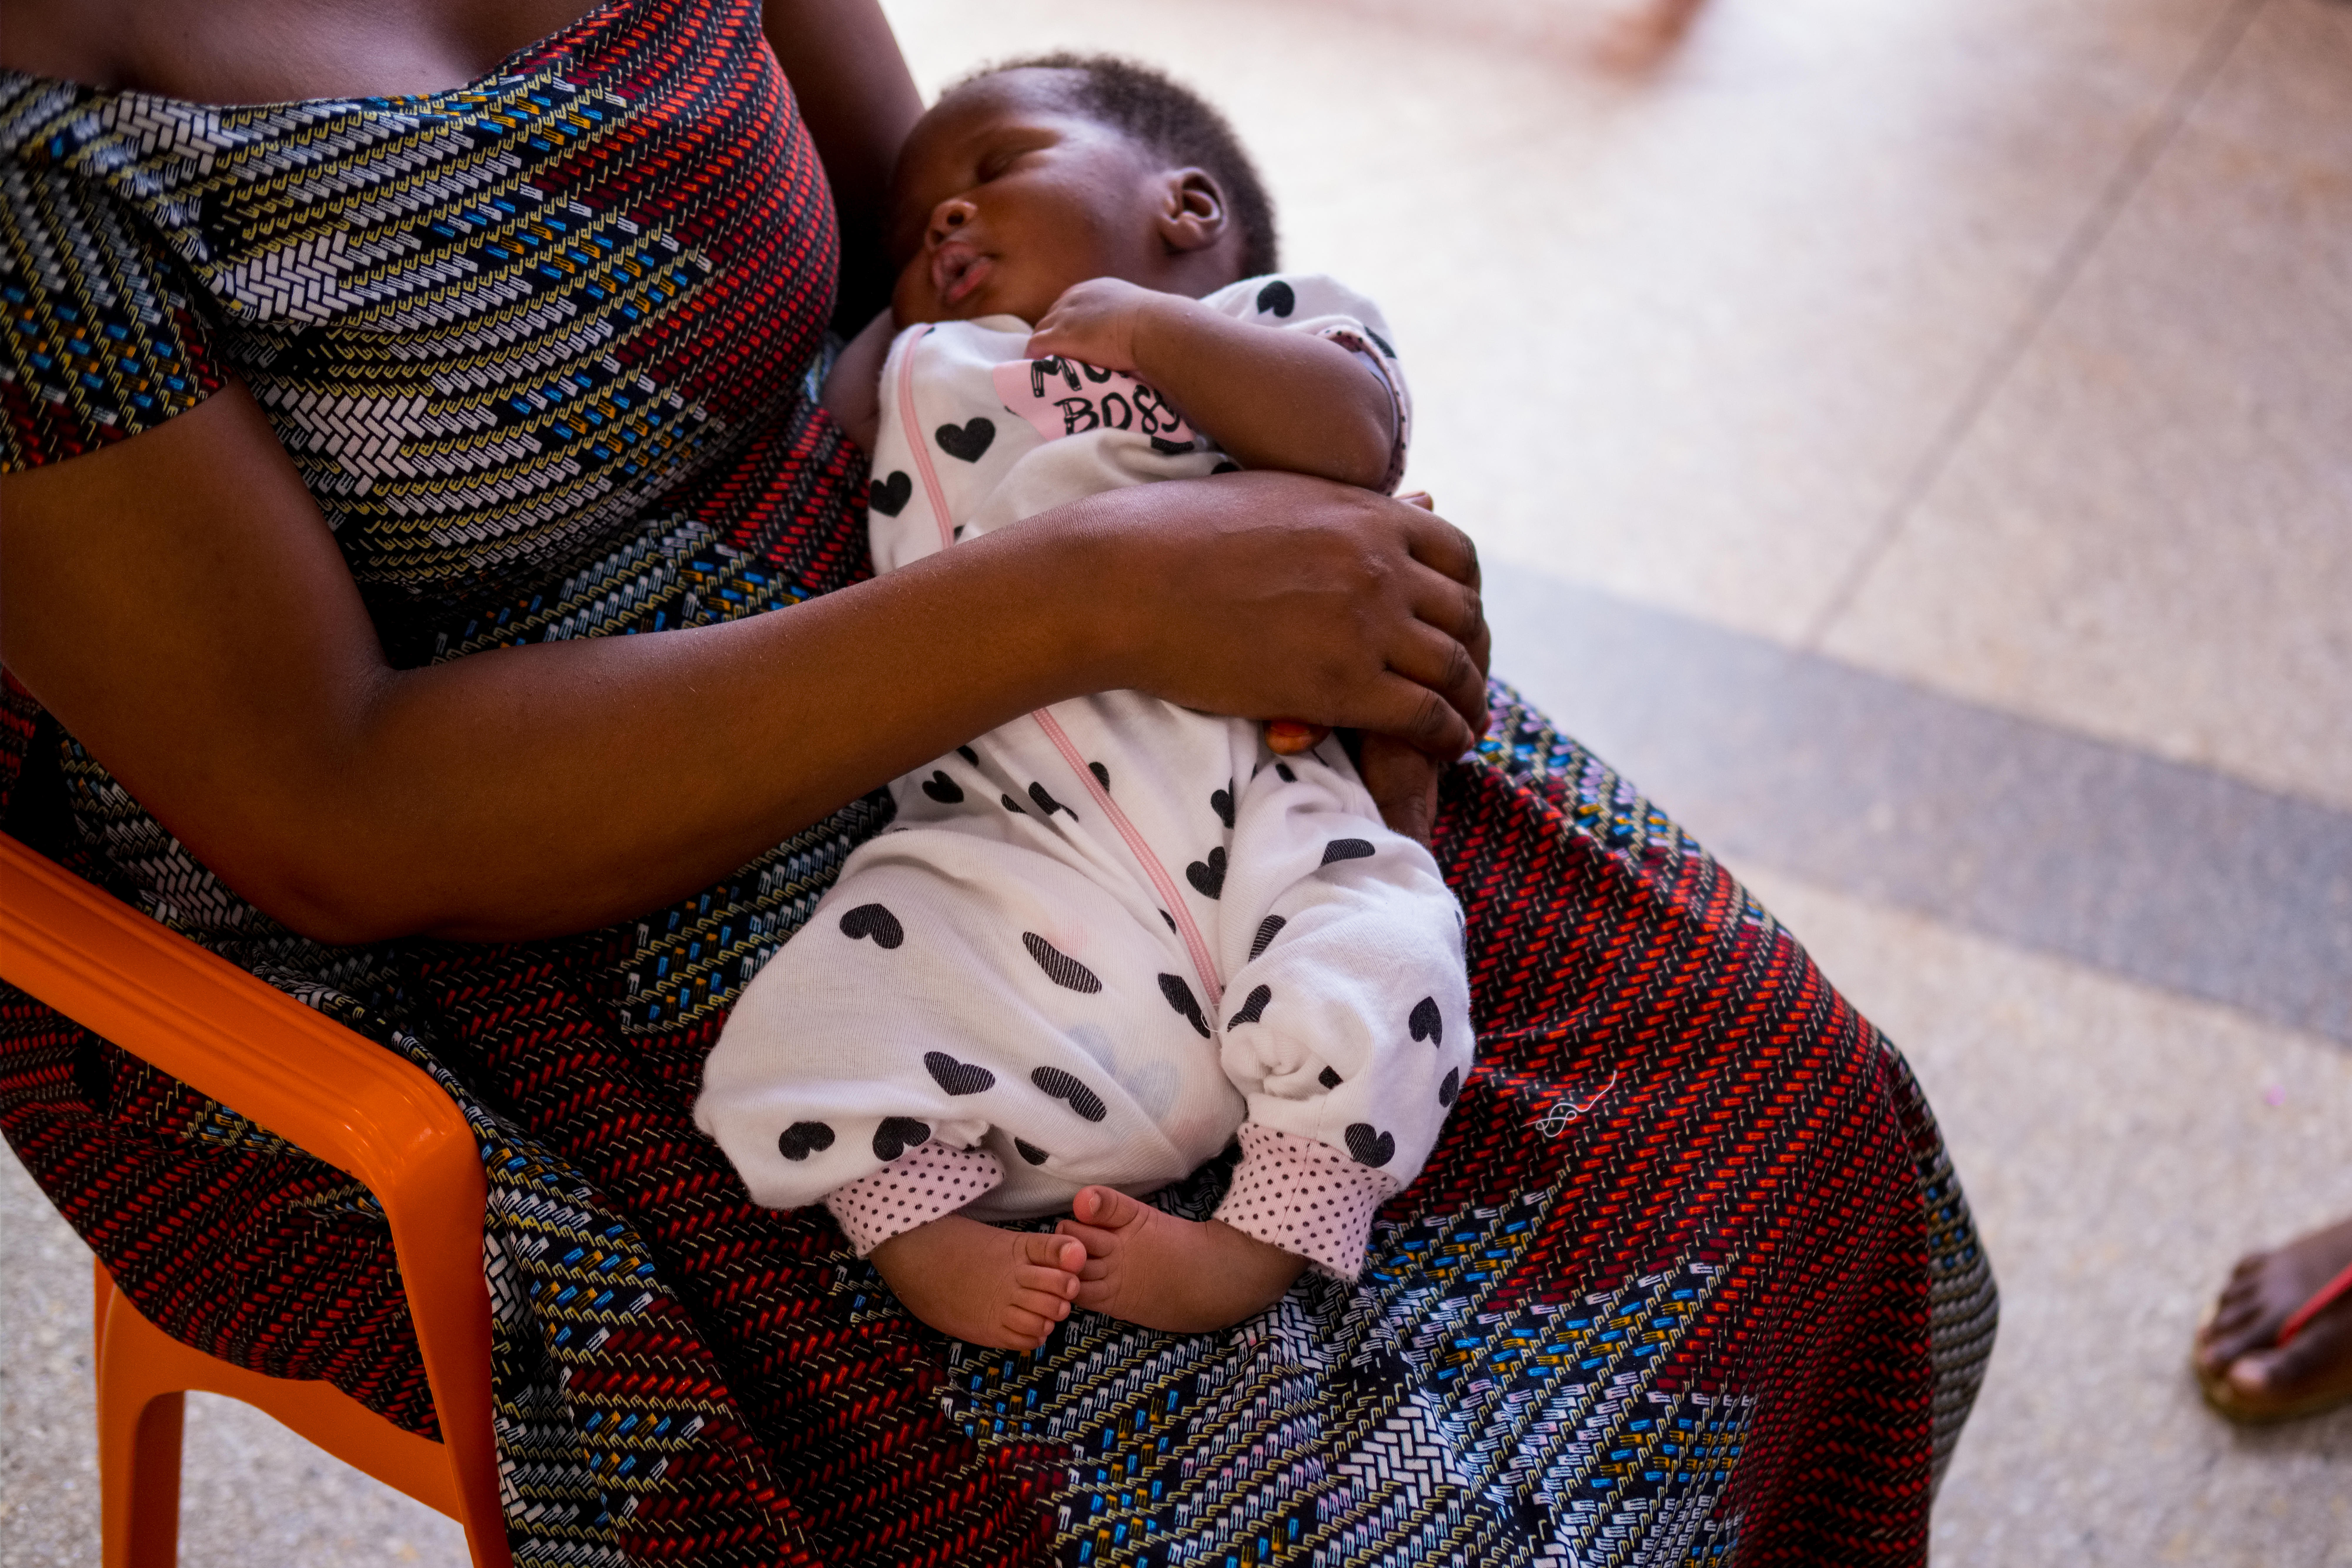 A woman sitting on a chair with an infant with clubfoot condition